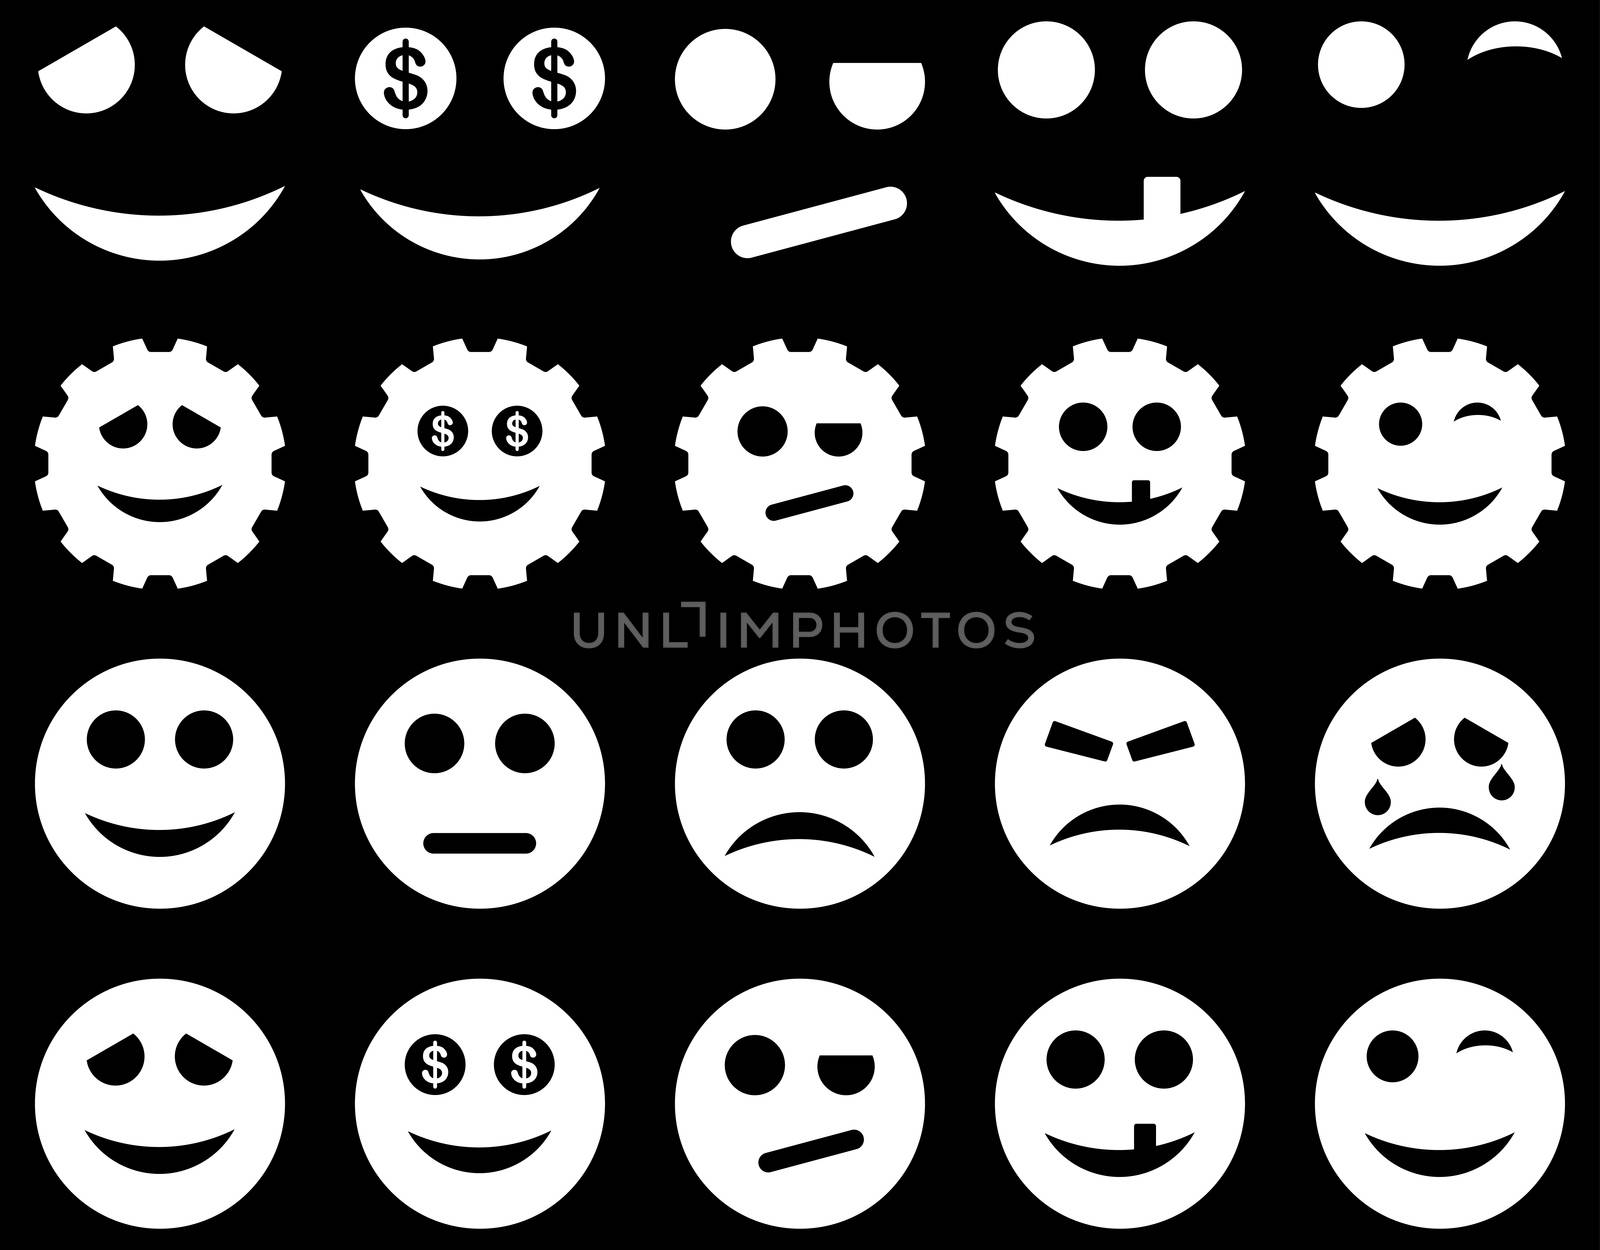 Tools, gears, smiles, emoticons icons. Glyph set style is flat images, white symbols, isolated on a black background.